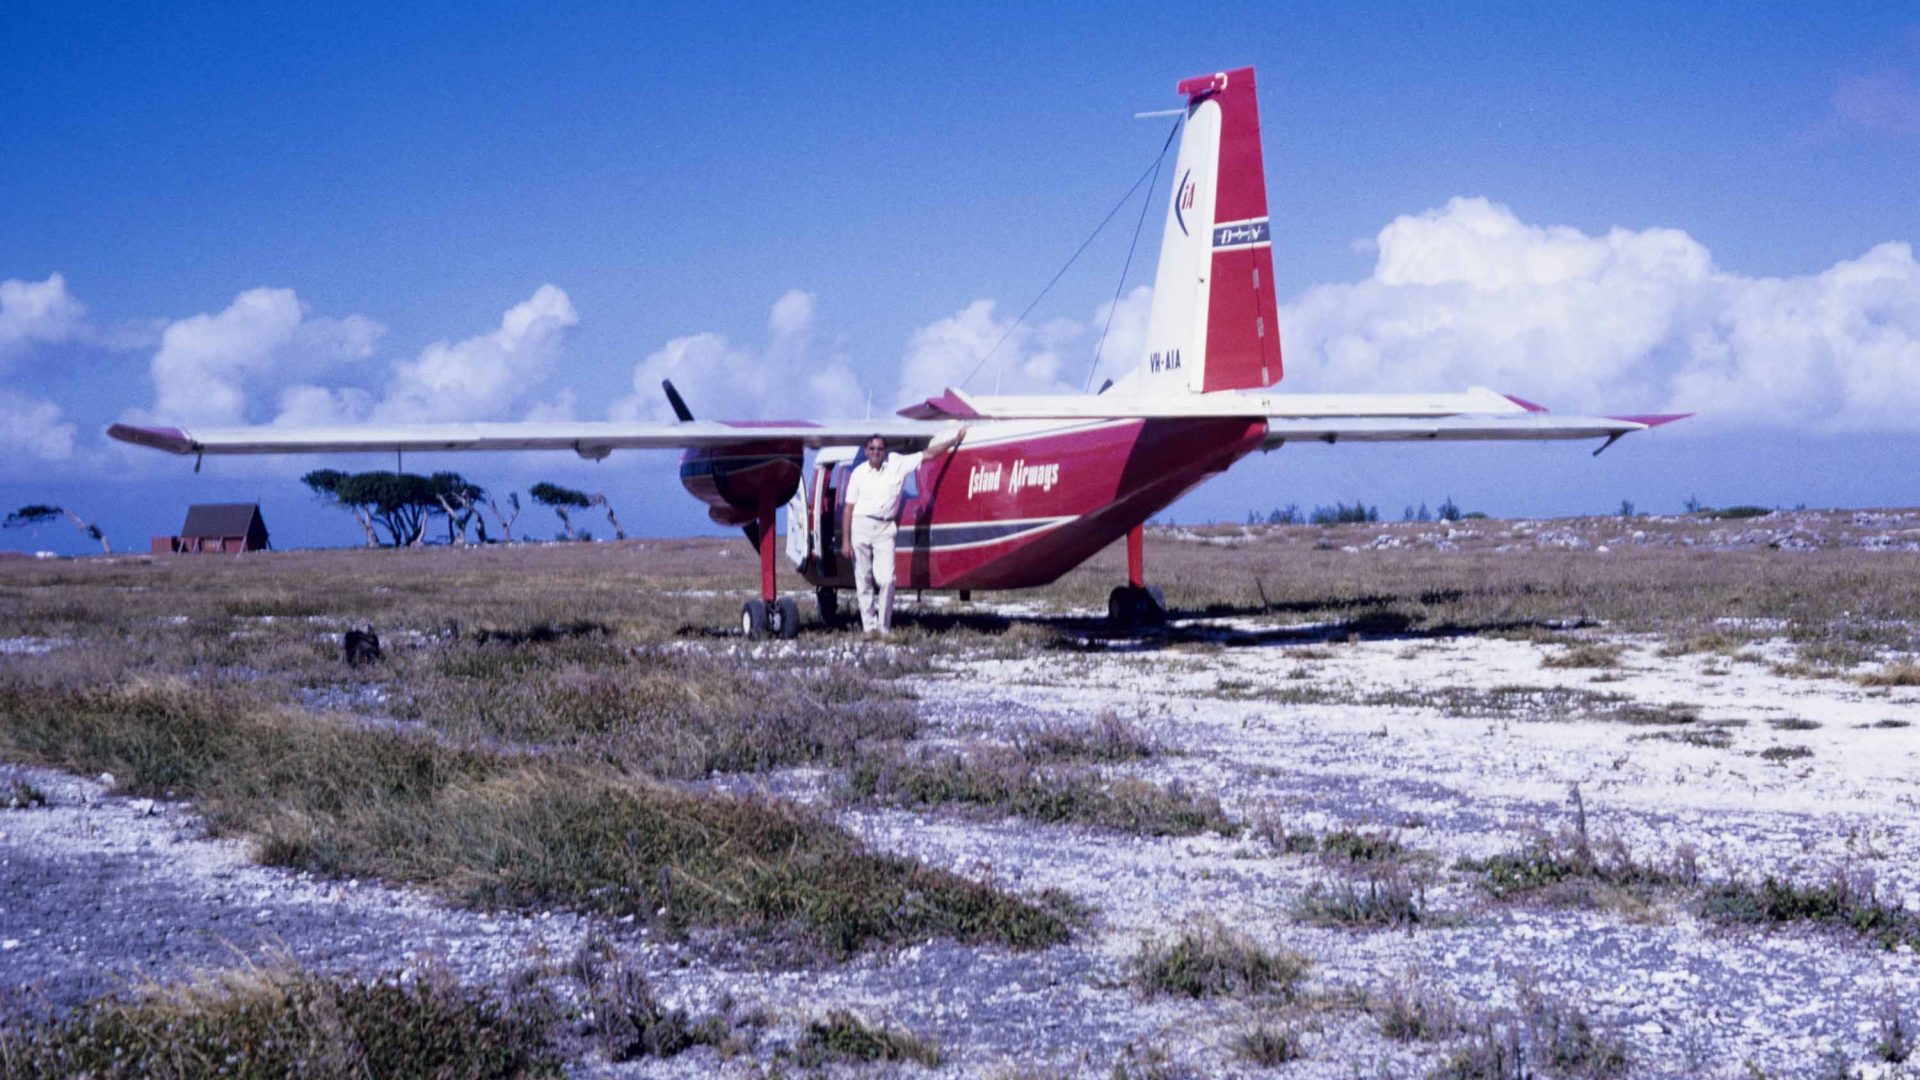 A man next to a small red and white plane.